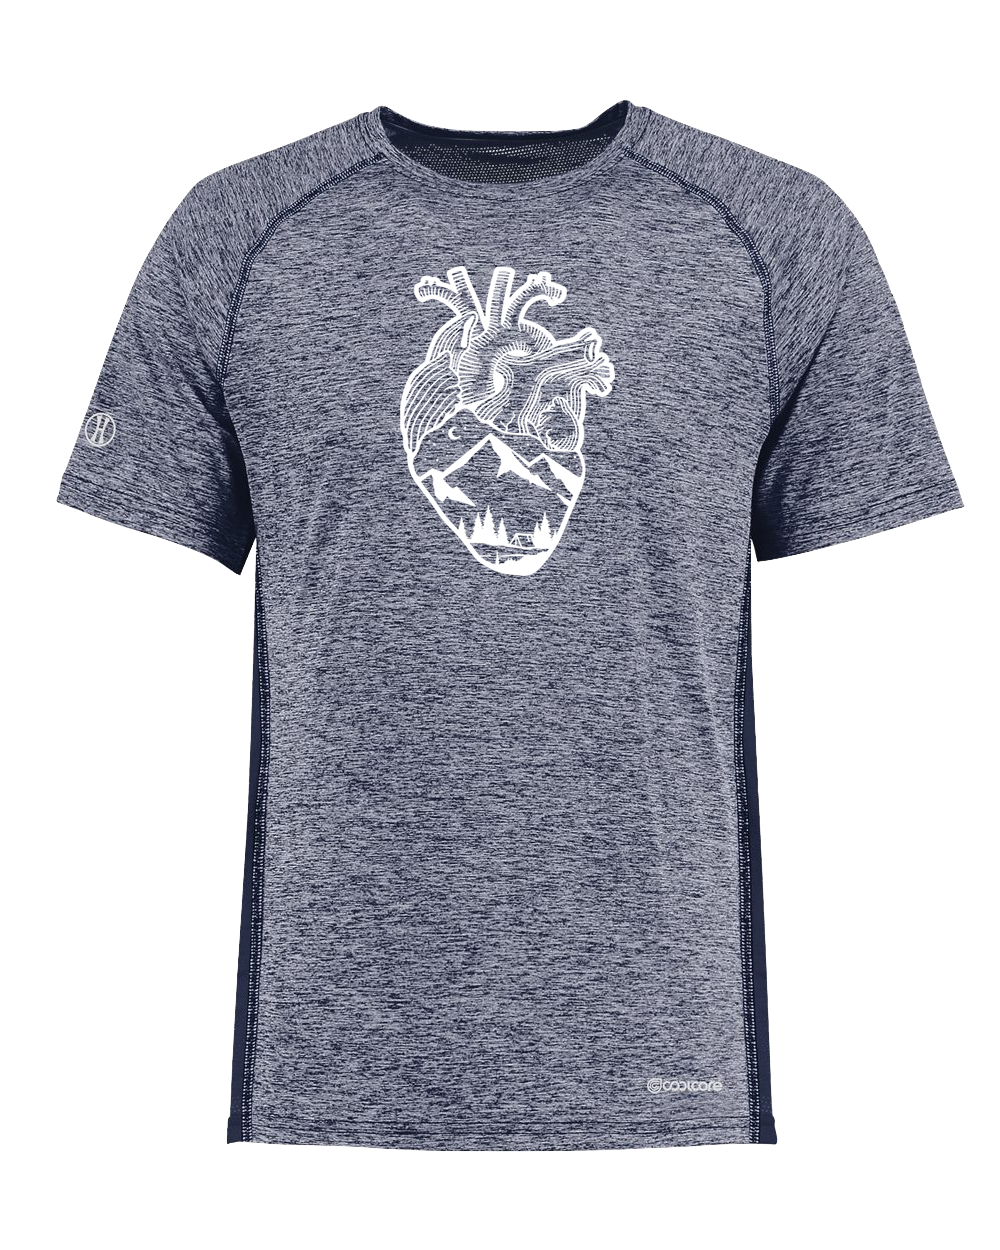 ANATOMICAL HEART (FULL CHEST) Poly/Elastane High Performance T-Shirt with UPF 50+